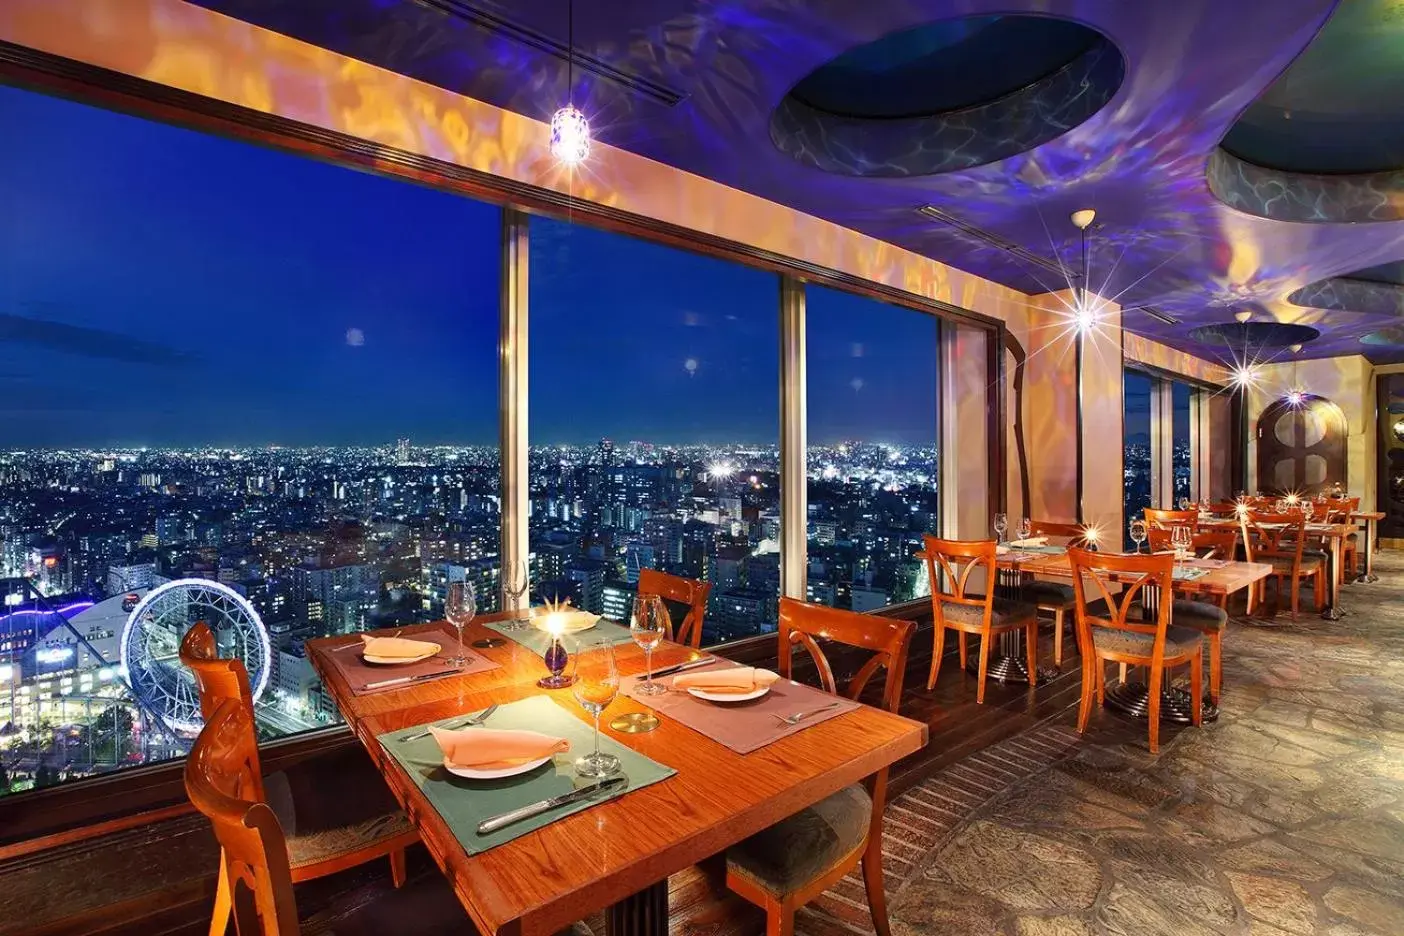 Restaurant/Places to Eat in Tokyo Dome Hotel